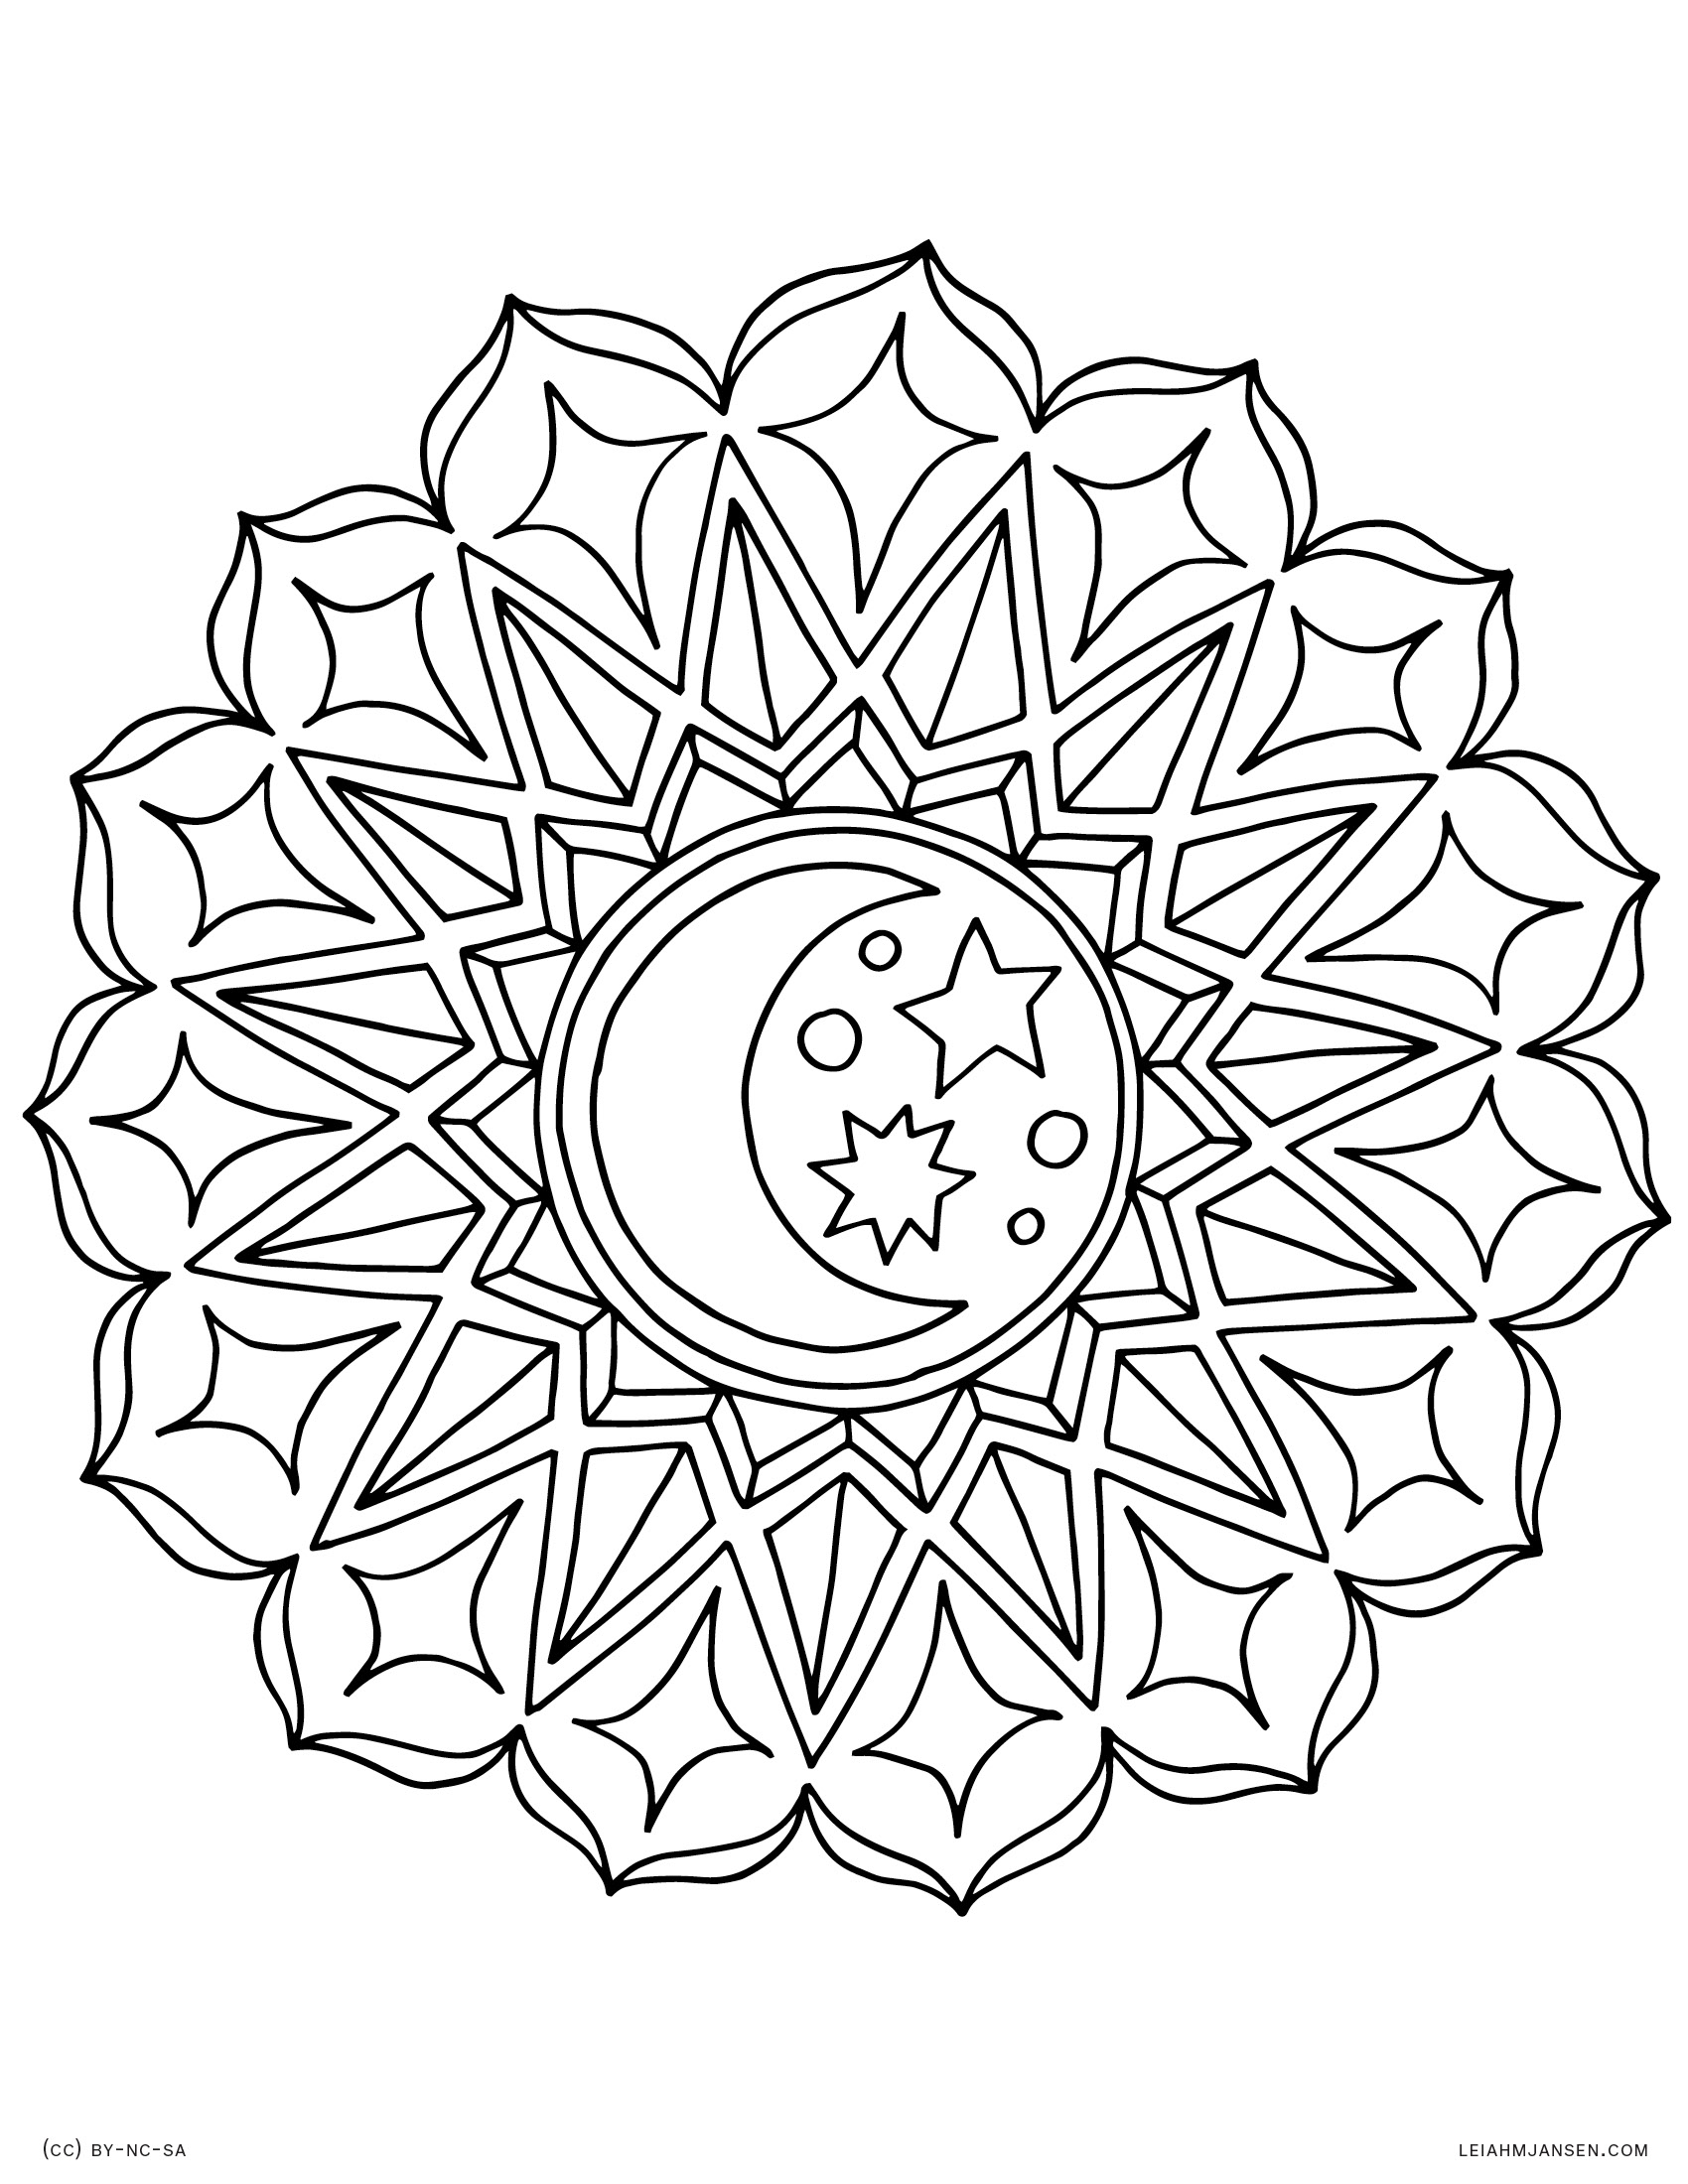 Dreamcatcher Mandala Coloring Pages at GetColorings.com | Free